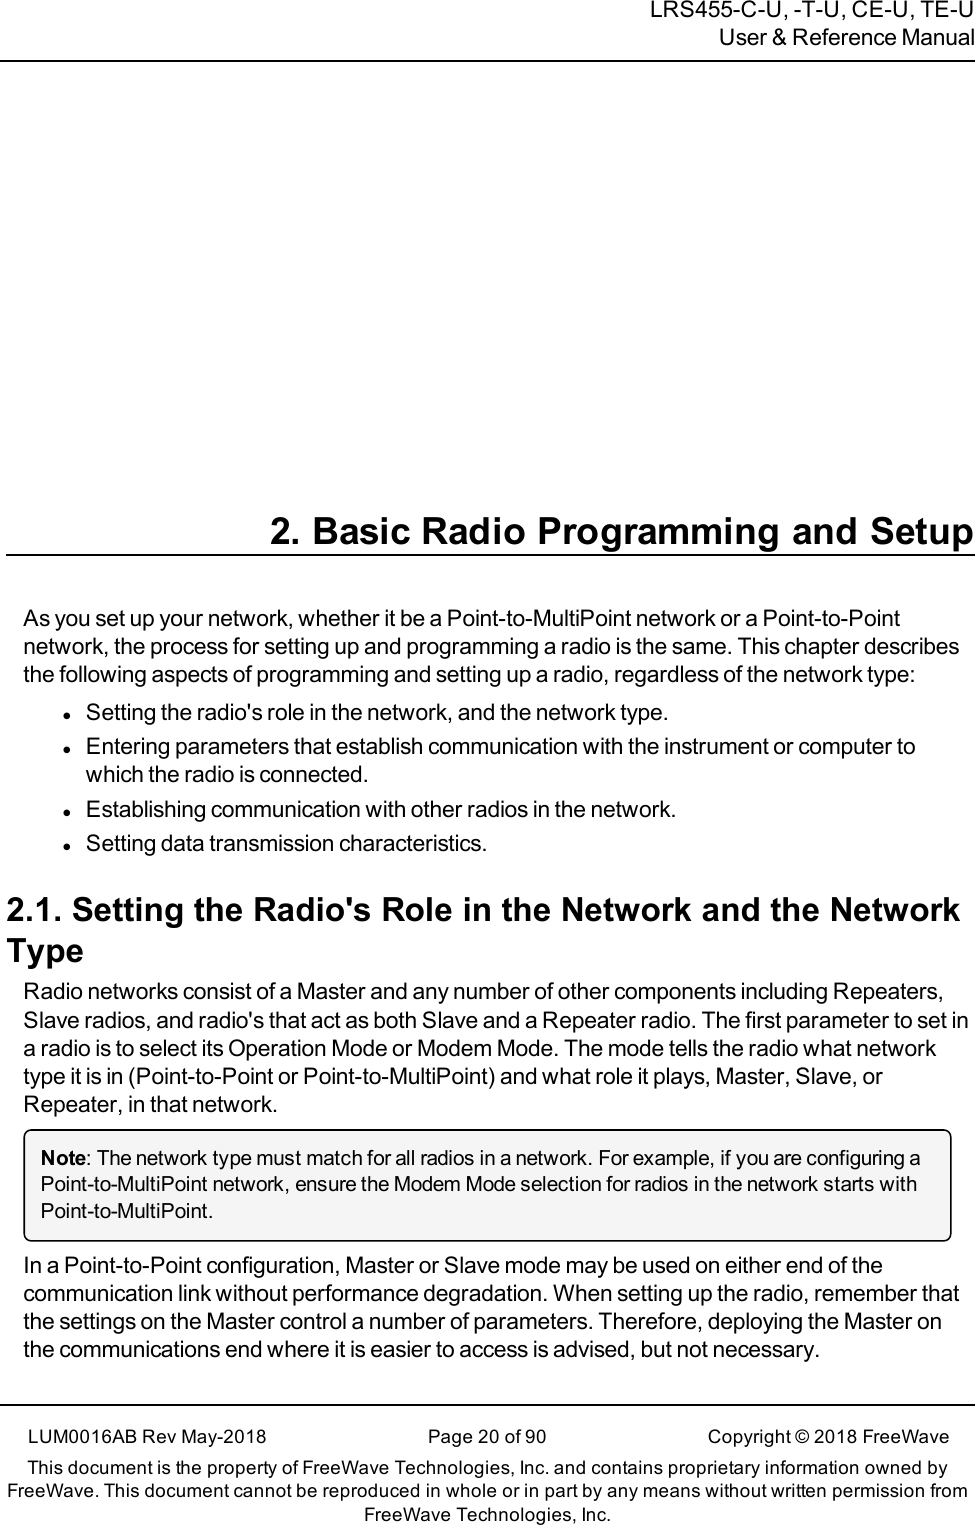 LRS455-C-U, -T-U, CE-U, TE-UUser &amp; Reference Manual2. Basic Radio Programming and SetupAs you set up your network, whether it be a Point-to-MultiPoint network or a Point-to-Pointnetwork, the process for setting up and programming a radio is the same. This chapter describesthe following aspects of programming and setting up a radio, regardless of the network type:lSetting the radio&apos;s role in the network, and the network type.lEntering parameters that establish communication with the instrument or computer towhich the radio is connected.lEstablishing communication with other radios in the network.lSetting data transmission characteristics.2.1. Setting the Radio&apos;s Role in the Network and the NetworkTypeRadio networks consist of a Master and any number of other components including Repeaters,Slave radios, and radio&apos;s that act as both Slave and a Repeater radio. The first parameter to set ina radio is to select its Operation Mode or Modem Mode. The mode tells the radio what networktype it is in (Point-to-Point or Point-to-MultiPoint) and what role it plays, Master, Slave, orRepeater, in that network.Note: The network type must match for all radios in a network. For example, if you are configuring aPoint-to-MultiPoint network, ensure the Modem Mode selection for radios in the network starts withPoint-to-MultiPoint.In a Point-to-Point configuration, Master or Slave mode may be used on either end of thecommunication link without performance degradation. When setting up the radio, remember thatthe settings on the Master control a number of parameters. Therefore, deploying the Master onthe communications end where it is easier to access is advised, but not necessary.LUM0016AB Rev May-2018 Page 20 of 90 Copyright © 2018FreeWaveThis document is the property of FreeWave Technologies, Inc. and contains proprietary information owned byFreeWave. This document cannot be reproduced in whole or in part by any means without written permission fromFreeWave Technologies, Inc.